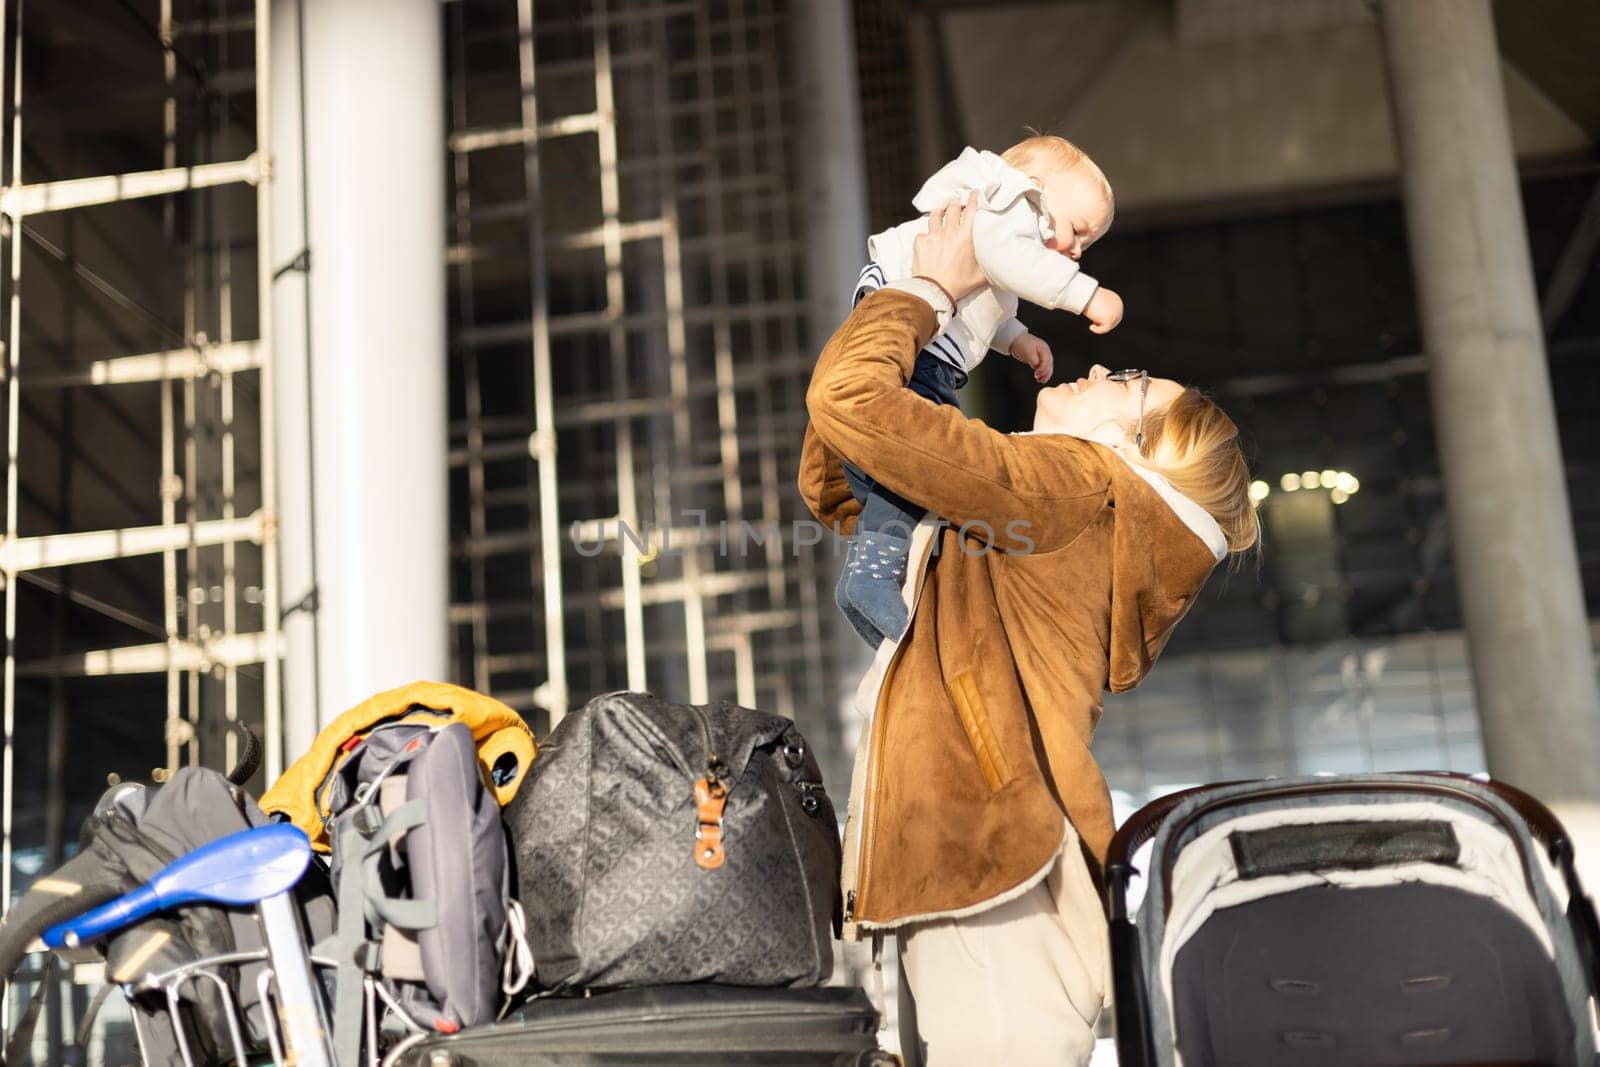 Motherat happily holding and lifting his infant baby boy child in the air after being rejunited in front of airport terminal station. Baby travel concept